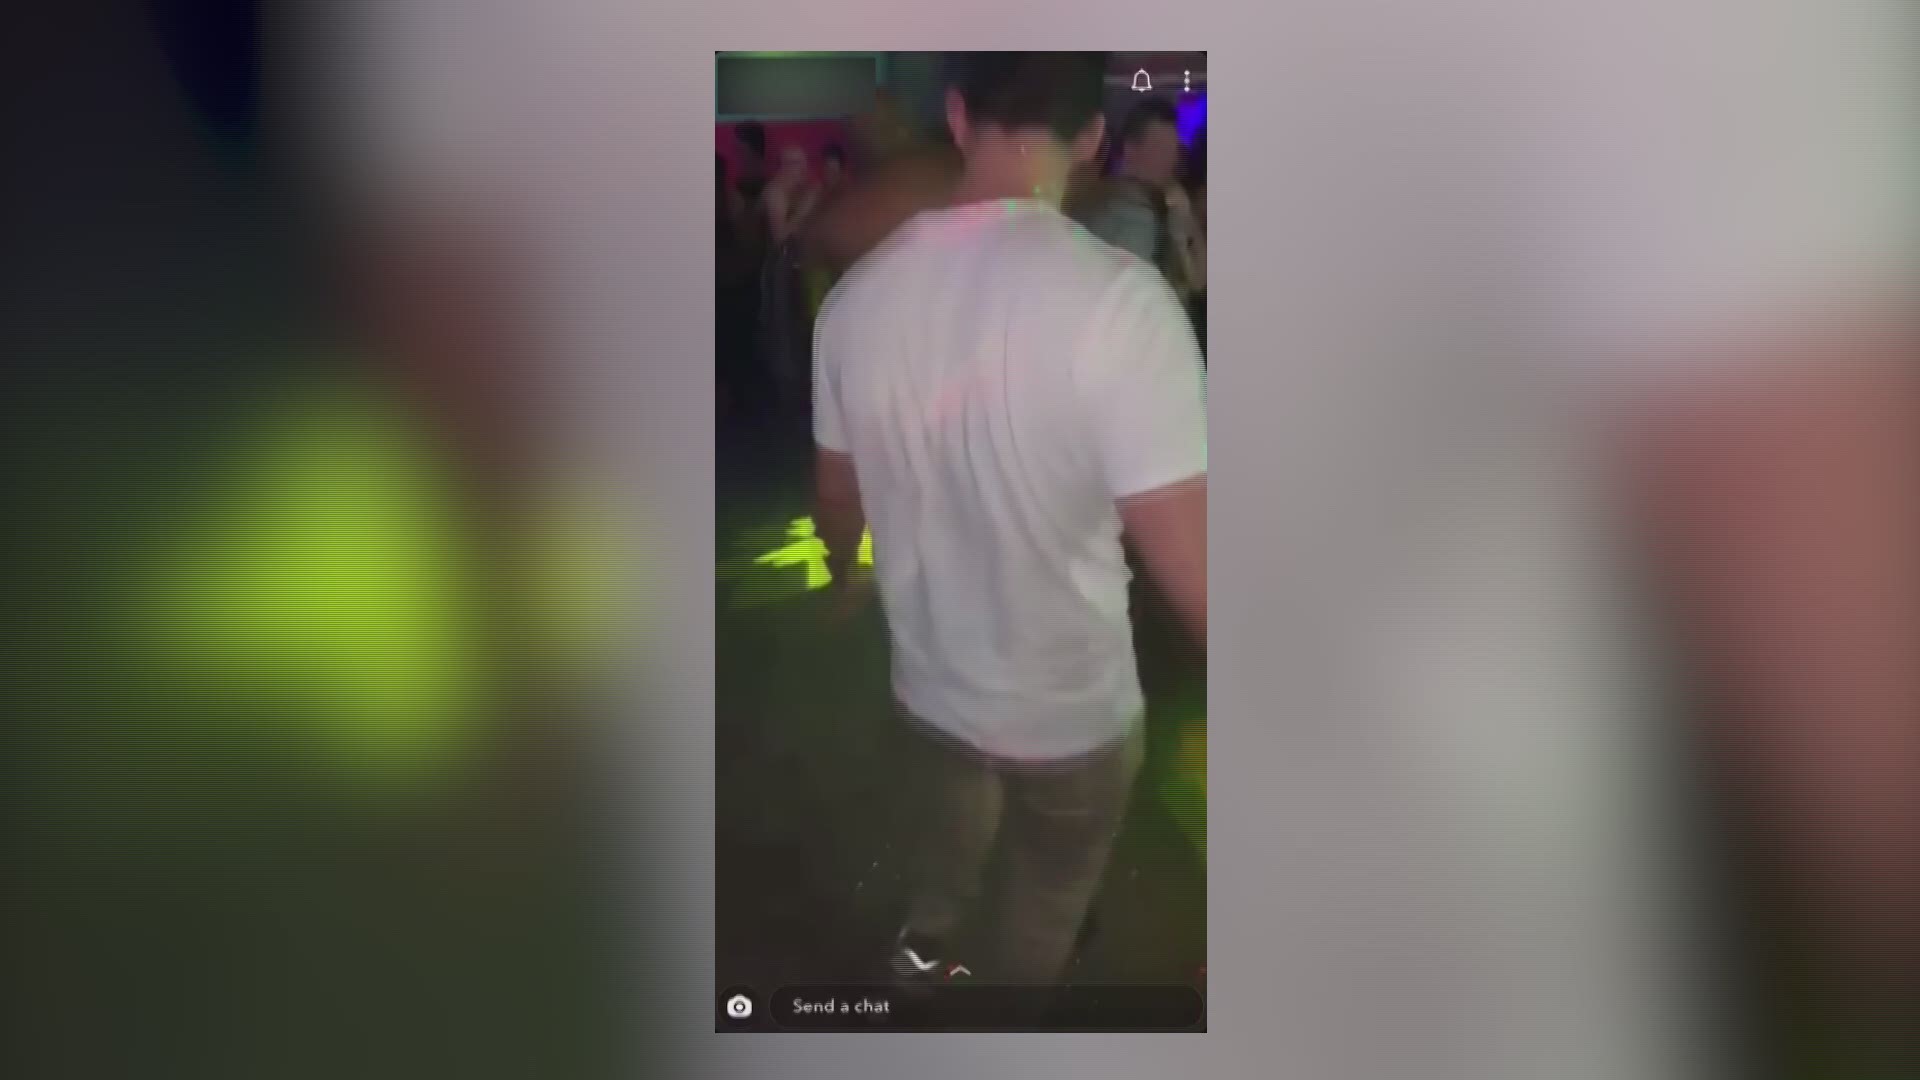 A Conway police officer has been suspended after a video shows him dancing naked and later struggling with security at a nightclub in Little Rock.